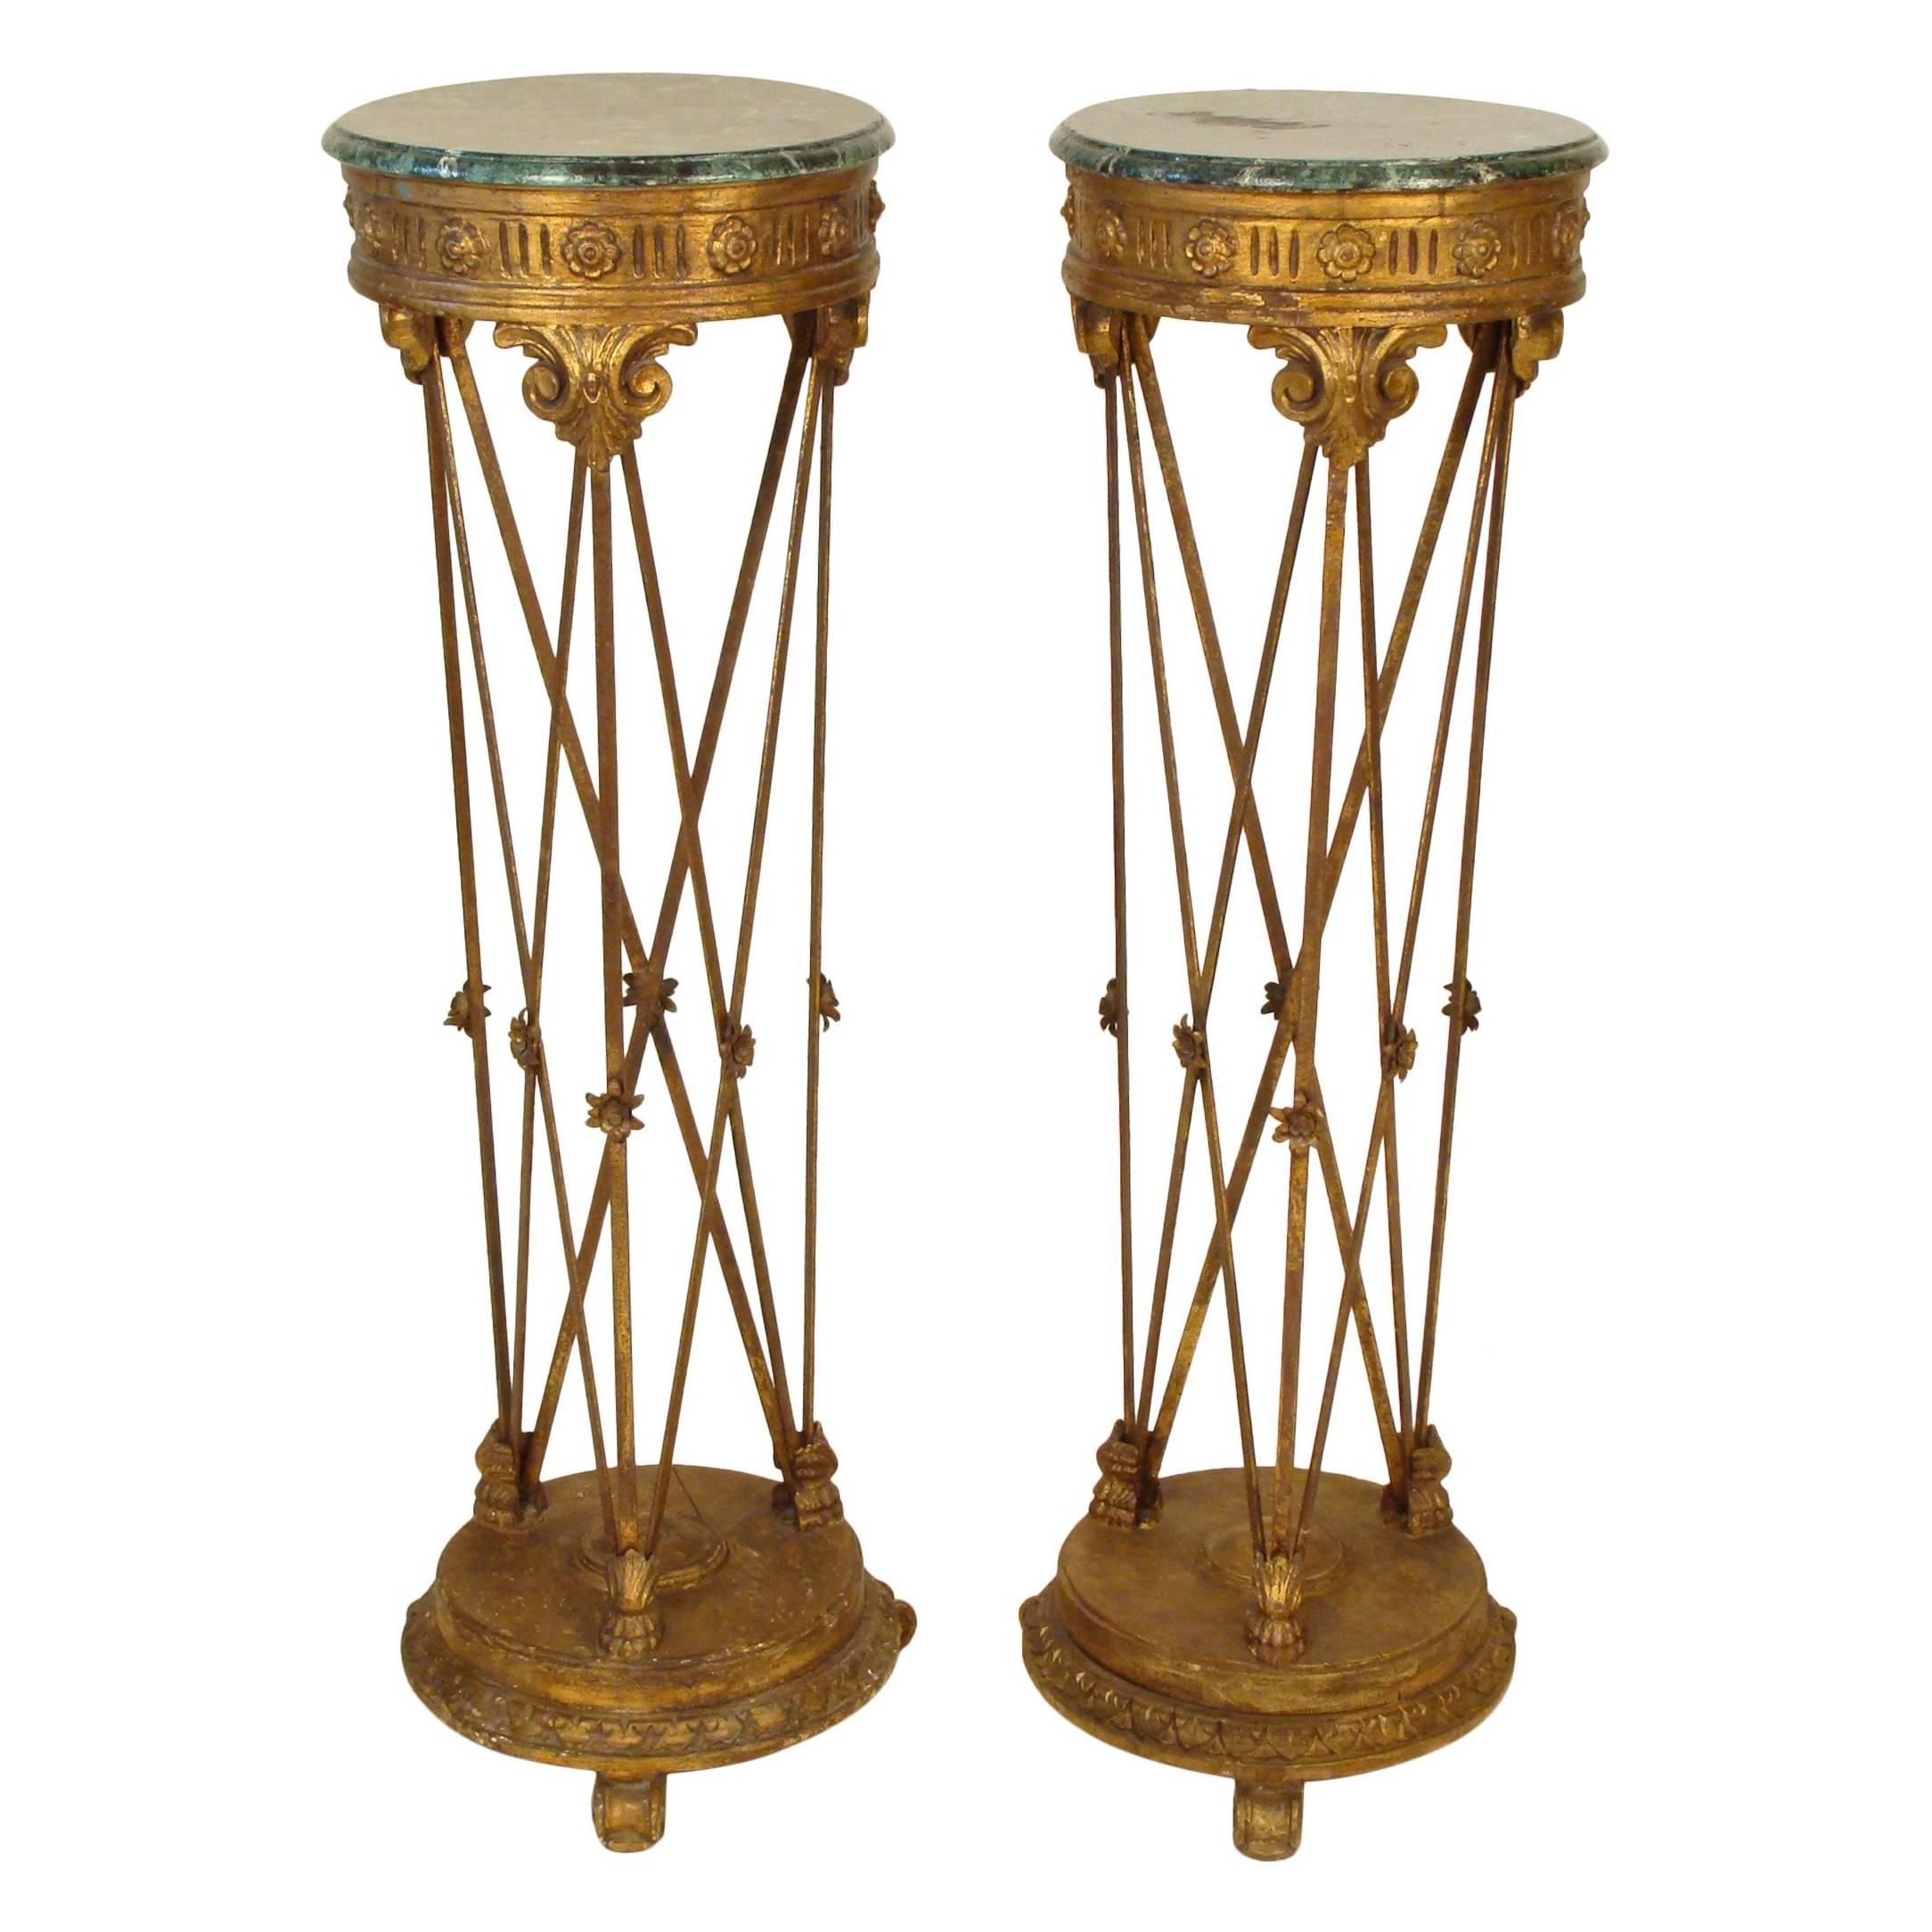 Pair of Neoclassical Style Pedestals